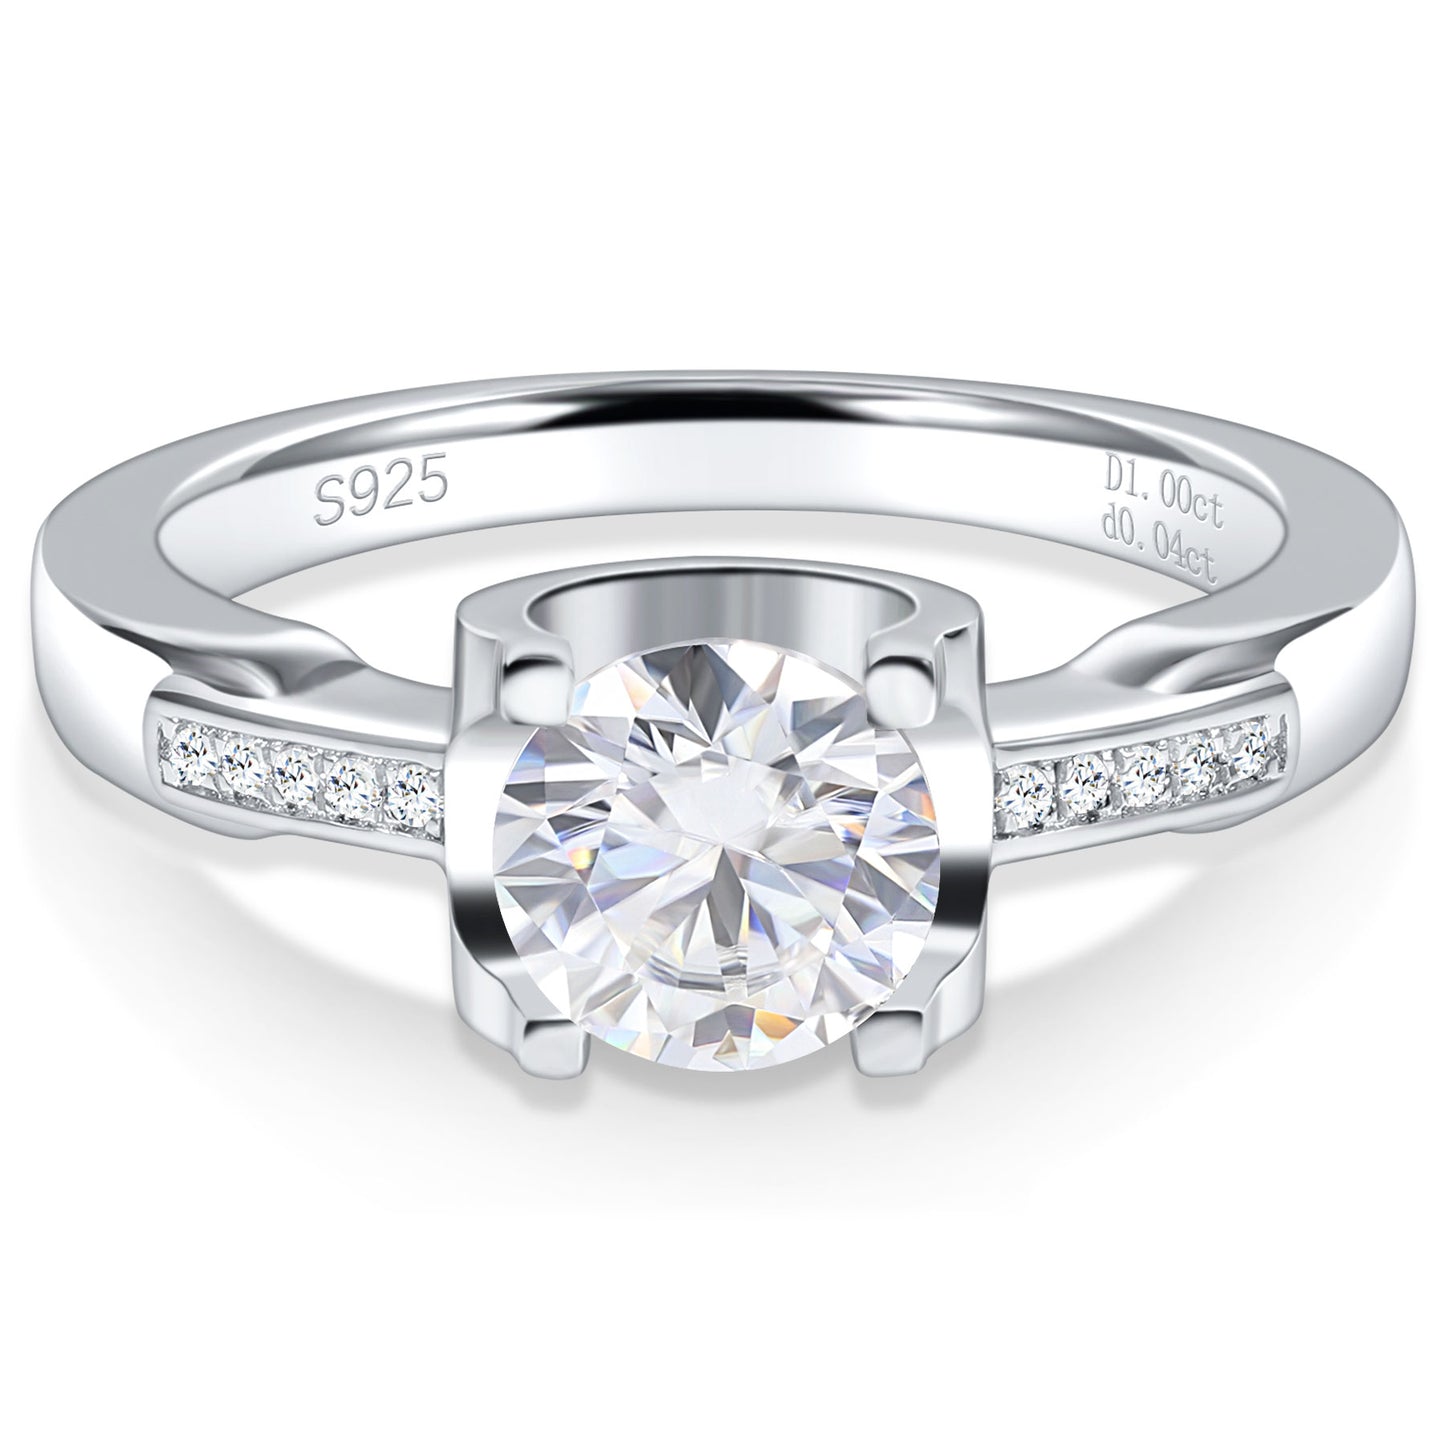 A silver tension set engagement ring with a tapered pave shank.